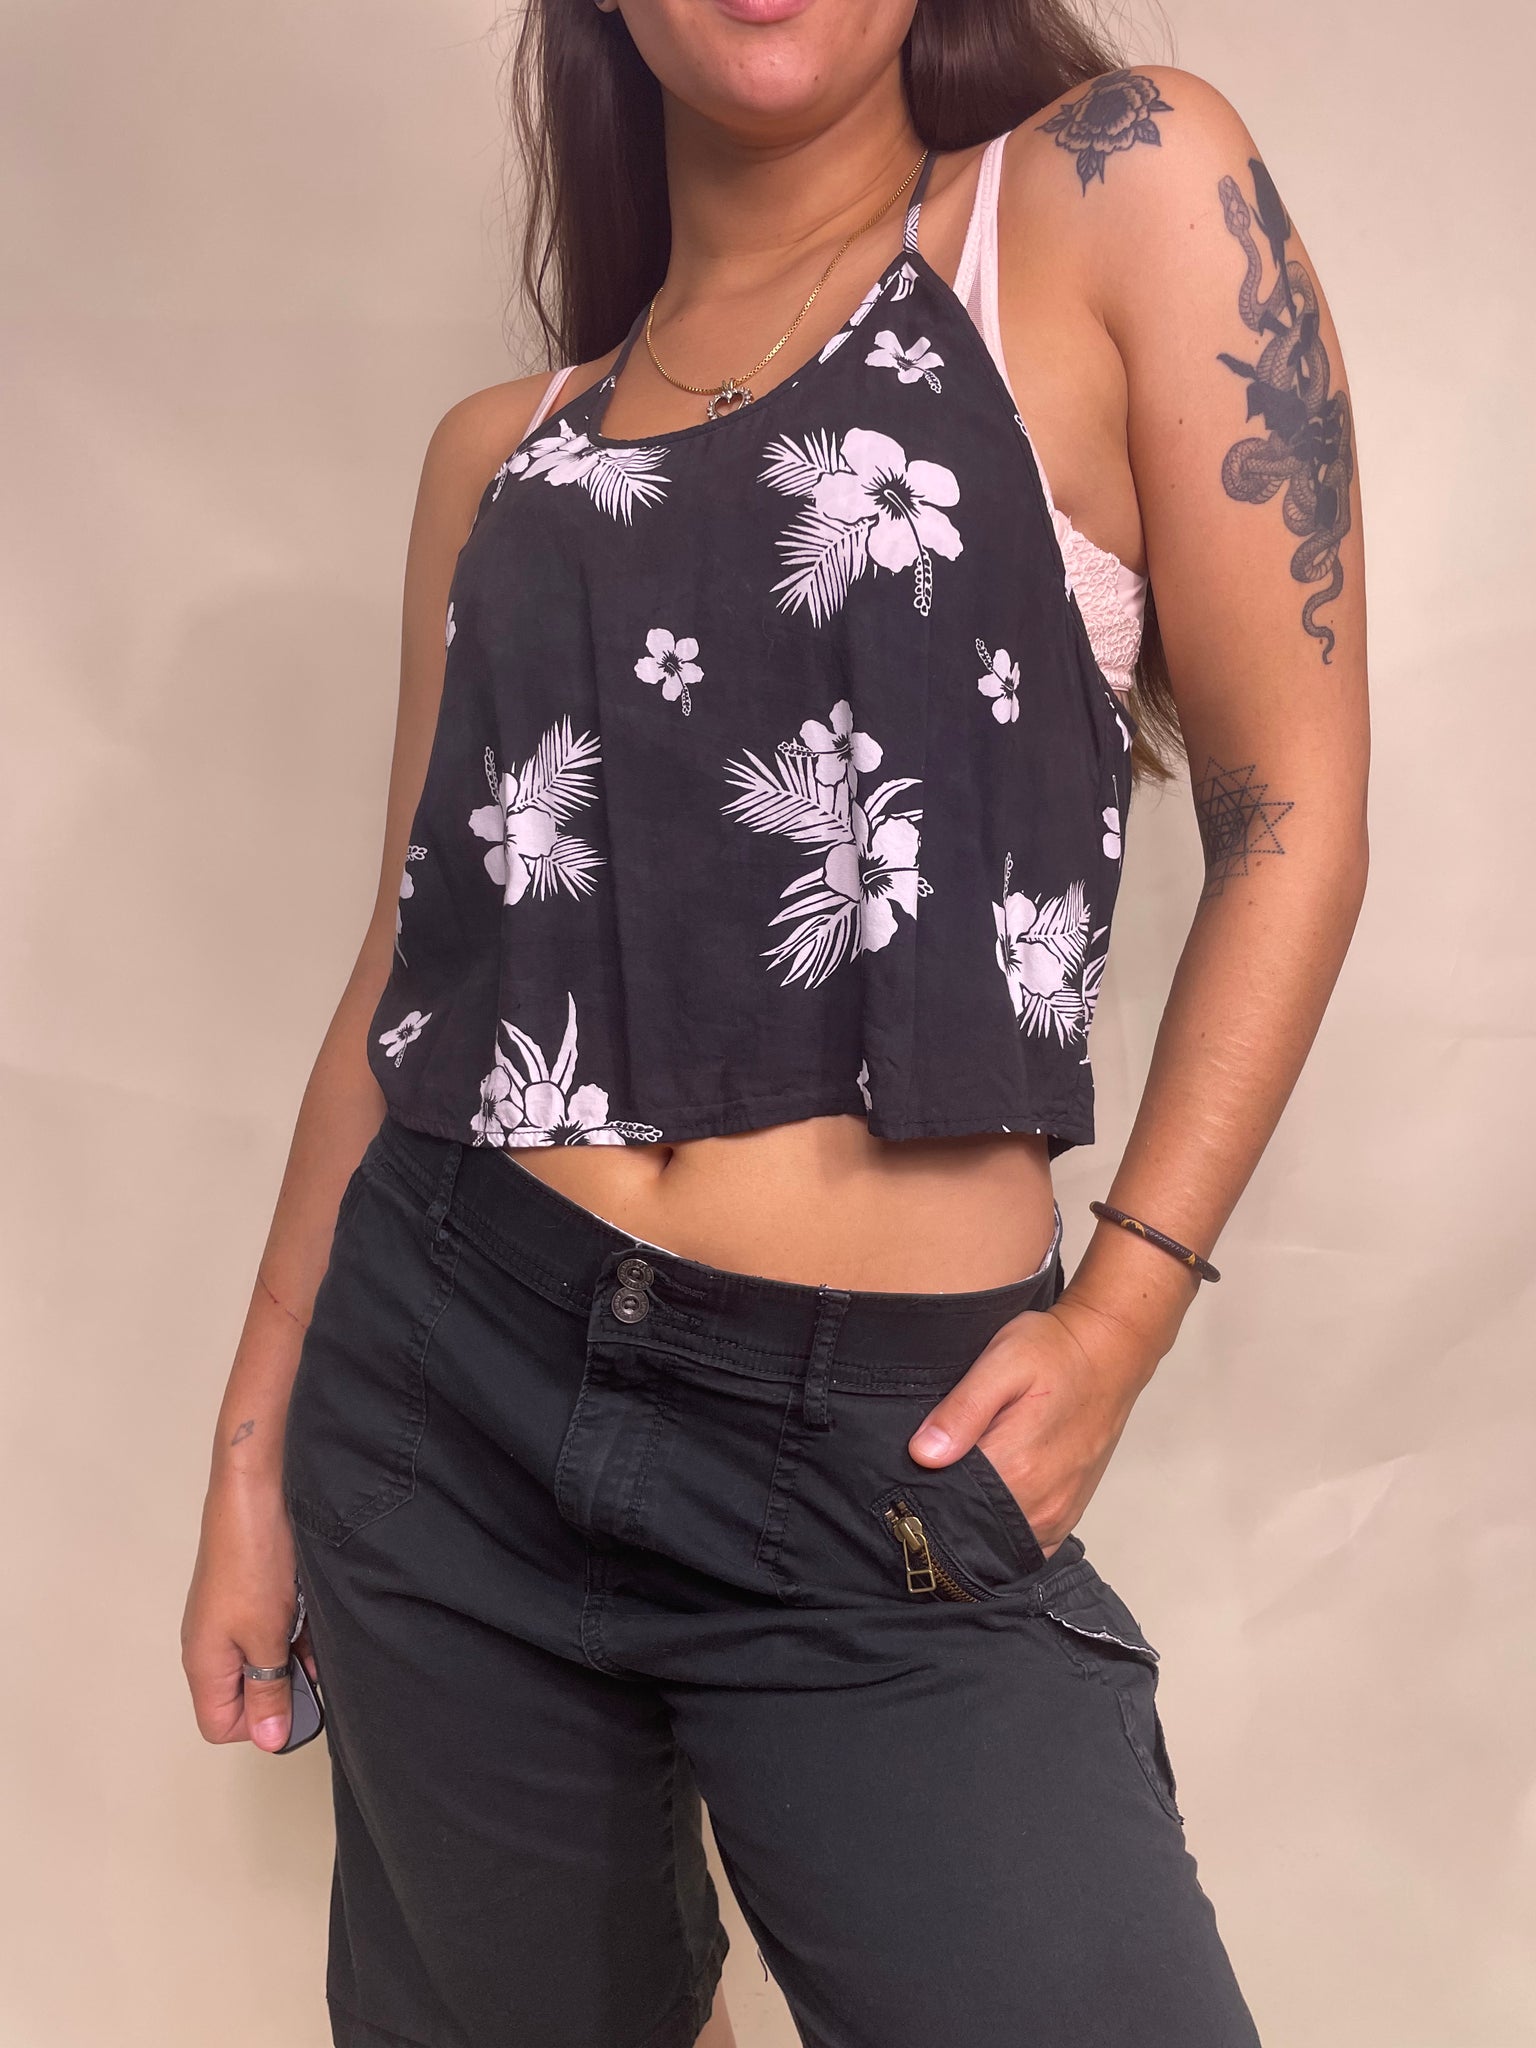 Floral print crop top, Size XS – Holy Ogre